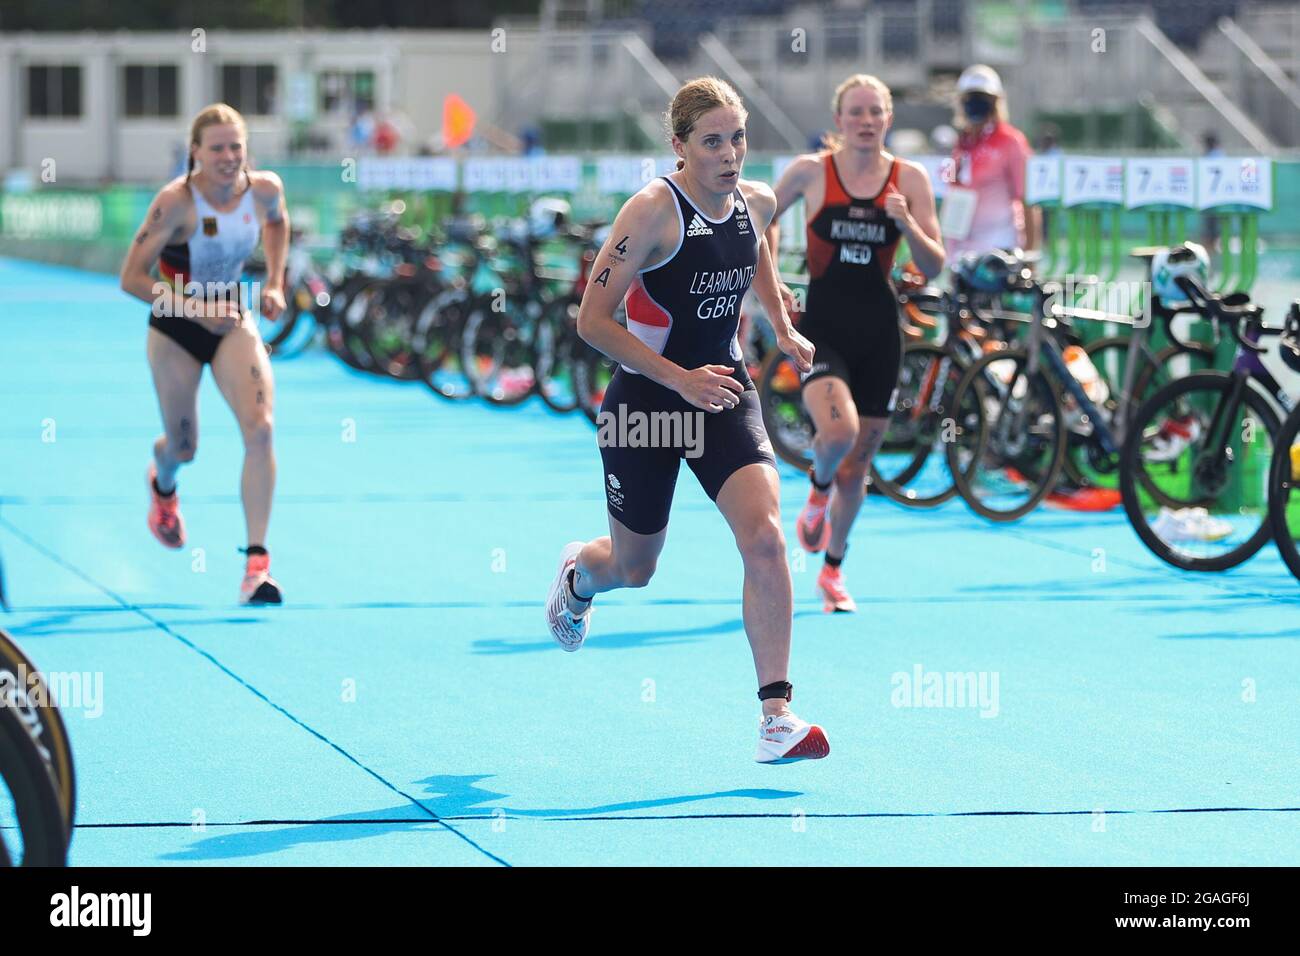 Tokyo, Japan. 31st July, 2021. Jessica Learmonth (C) of Great Britain competes during the triathlon mixed relay of the Tokyo 2020 Olympic Games in Tokyo, Japan, July 31, 2021. Credit: Zheng Huansong/Xinhua/Alamy Live News Stock Photo